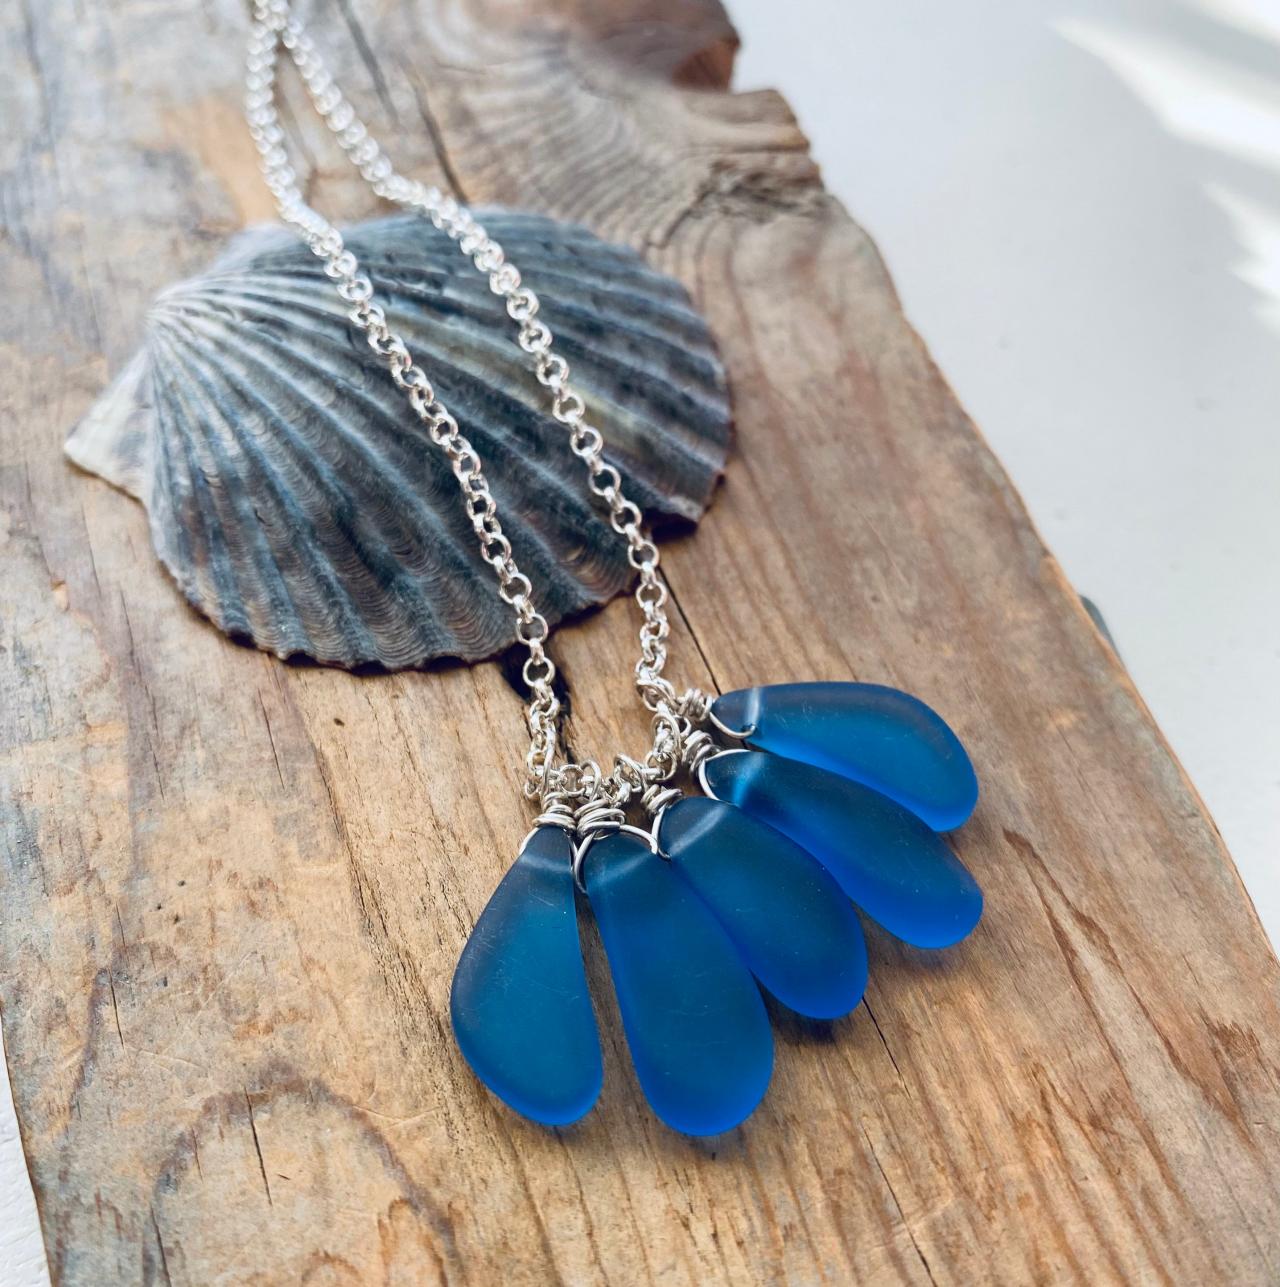 Sea Glass Necklace - Mermaid's Tears. Sterling Silver Cobalt Blue Summer Fashion Beachy Mothers Day Jewelry Recycled Glass Gifts Under